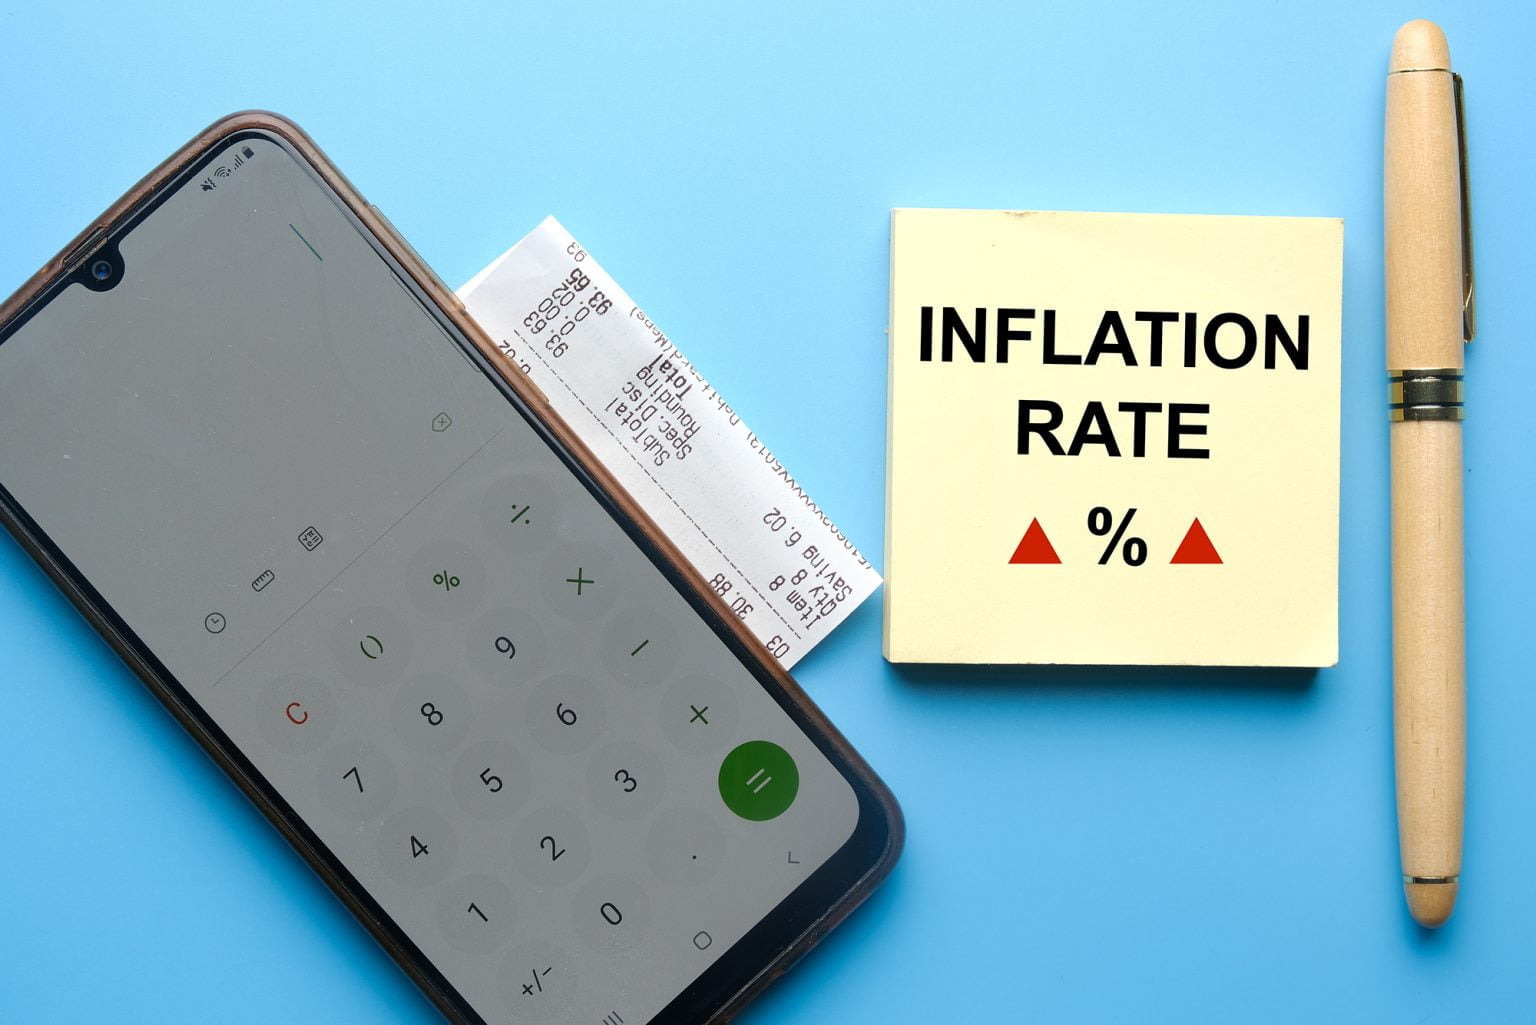 A picture of inflation rate word and notepad with pen, smartphone calculator and grocery receipt